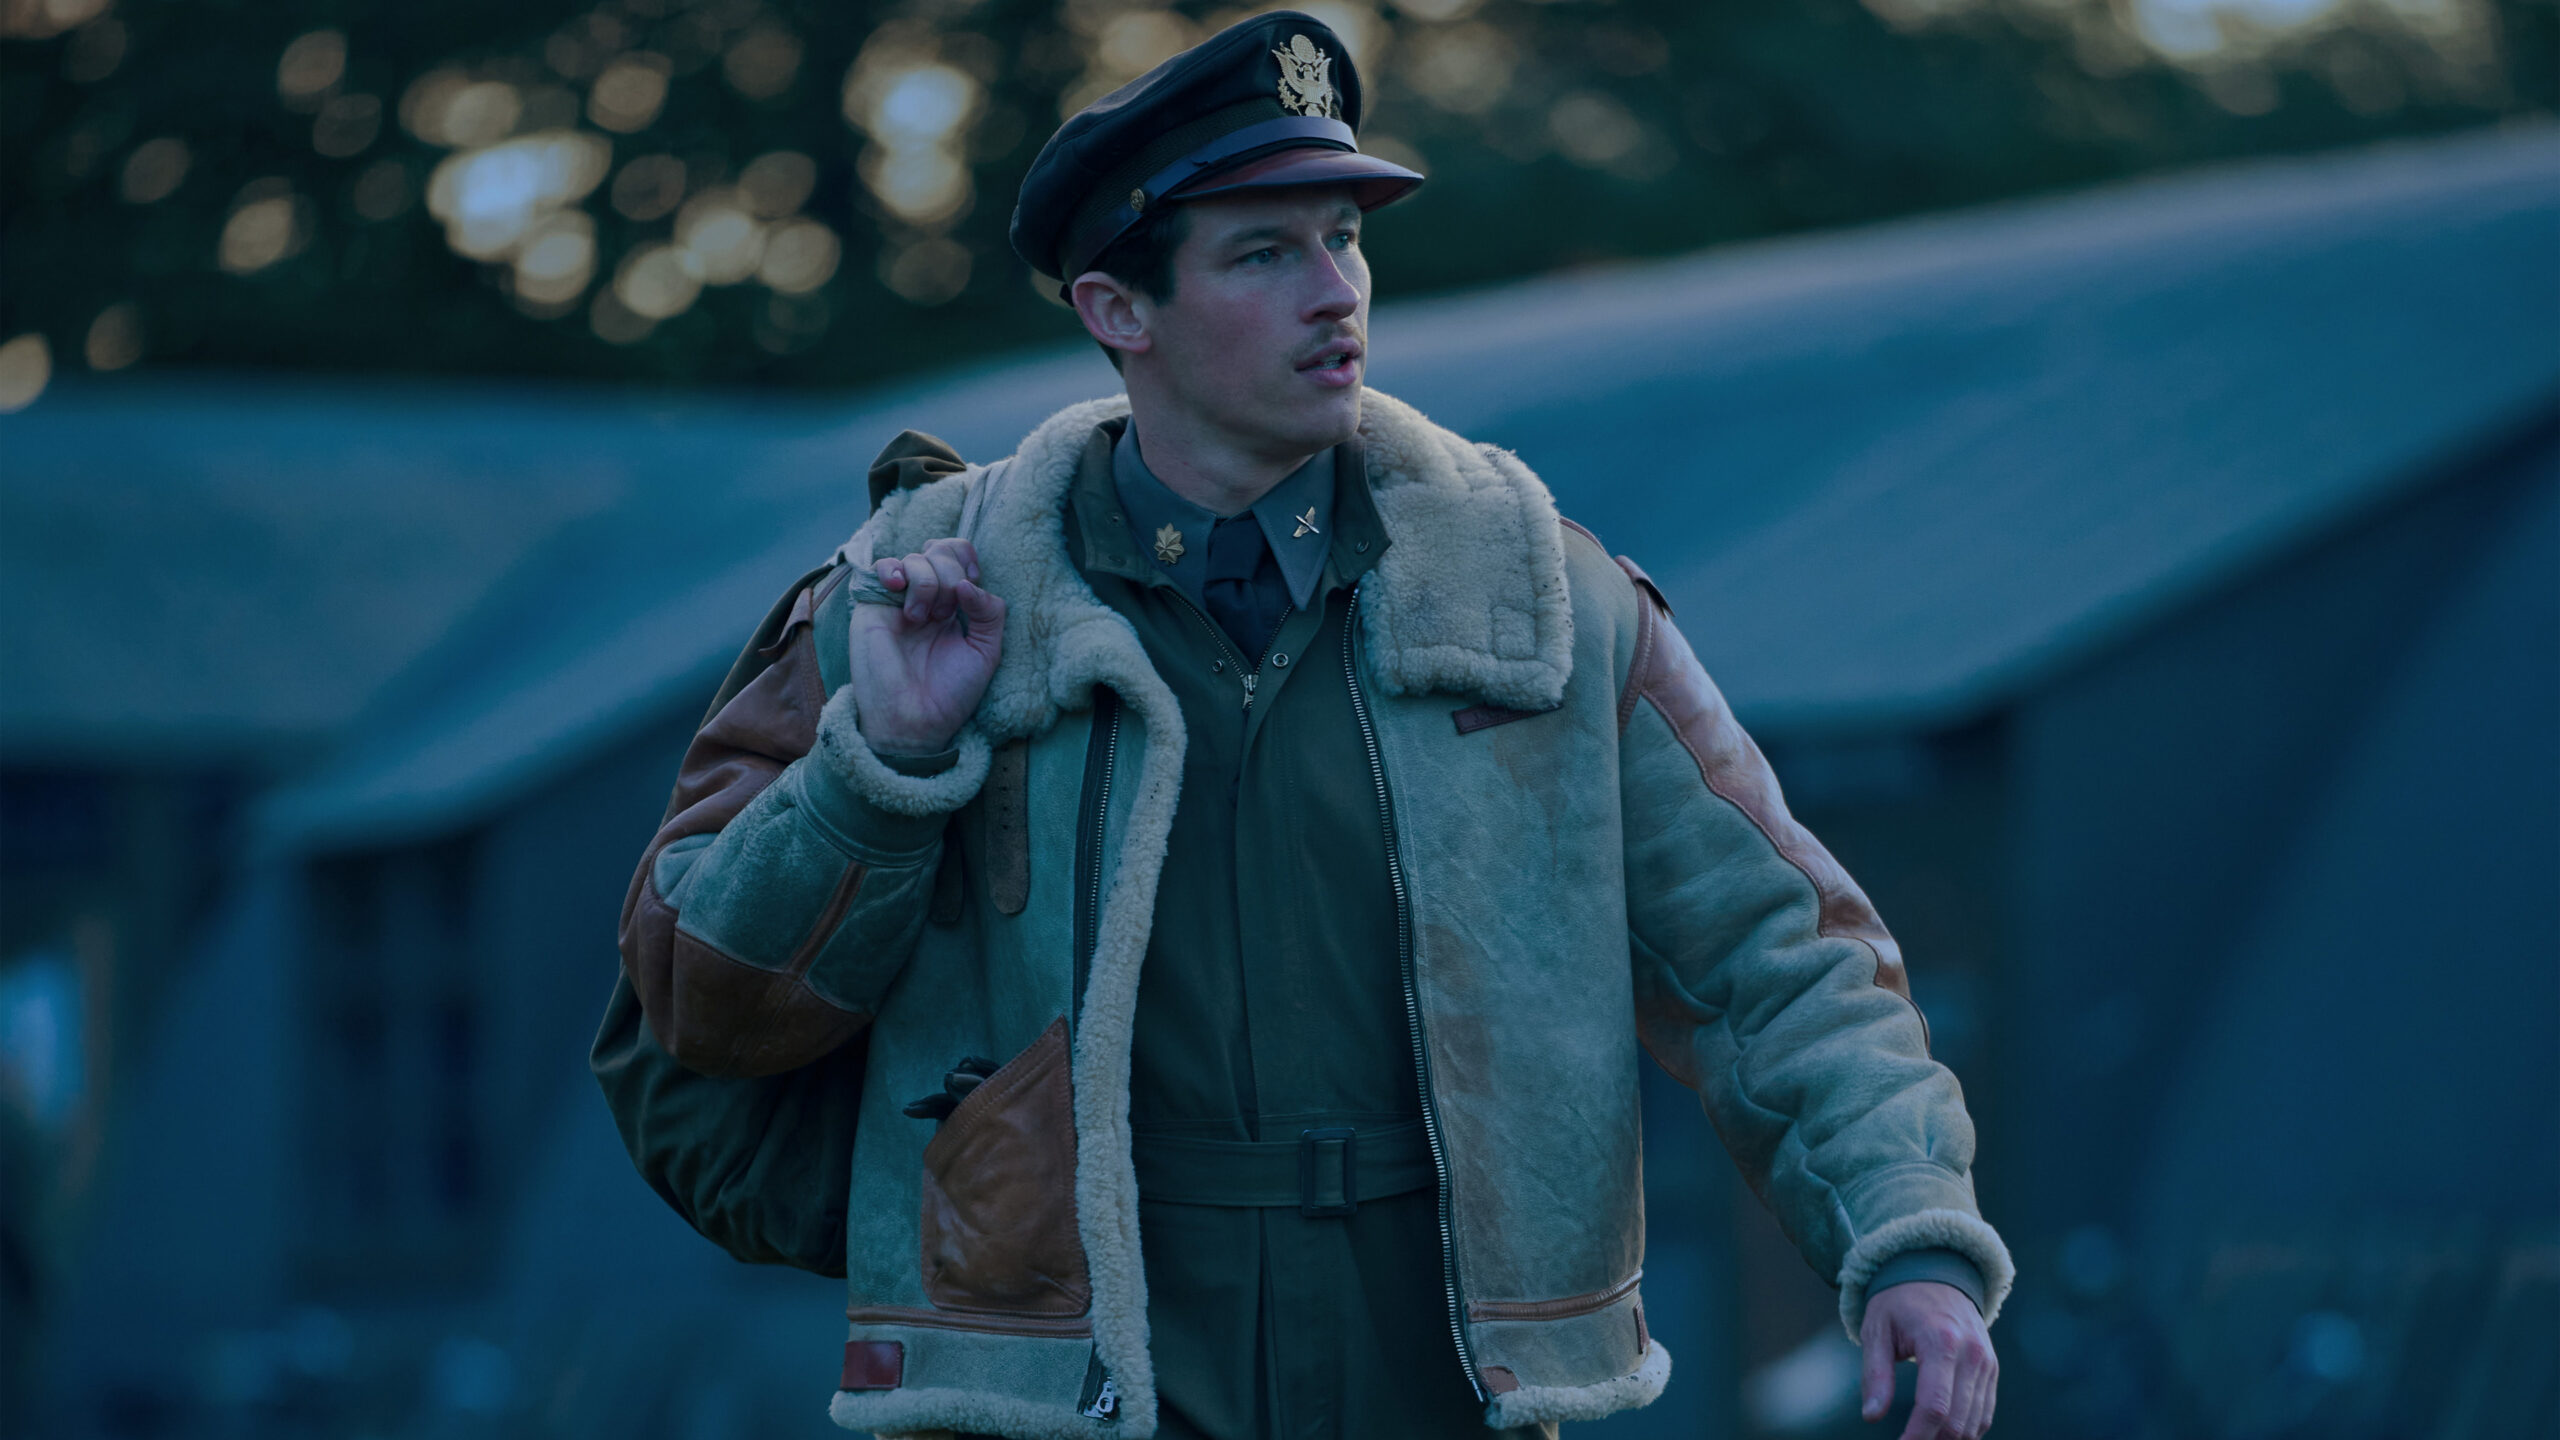 <em>Bucky did swap out his sheepskin jacket before the Munster mission. Buck didn't like the outerwear, describing it as "dirty" (Apple TV+)</em>